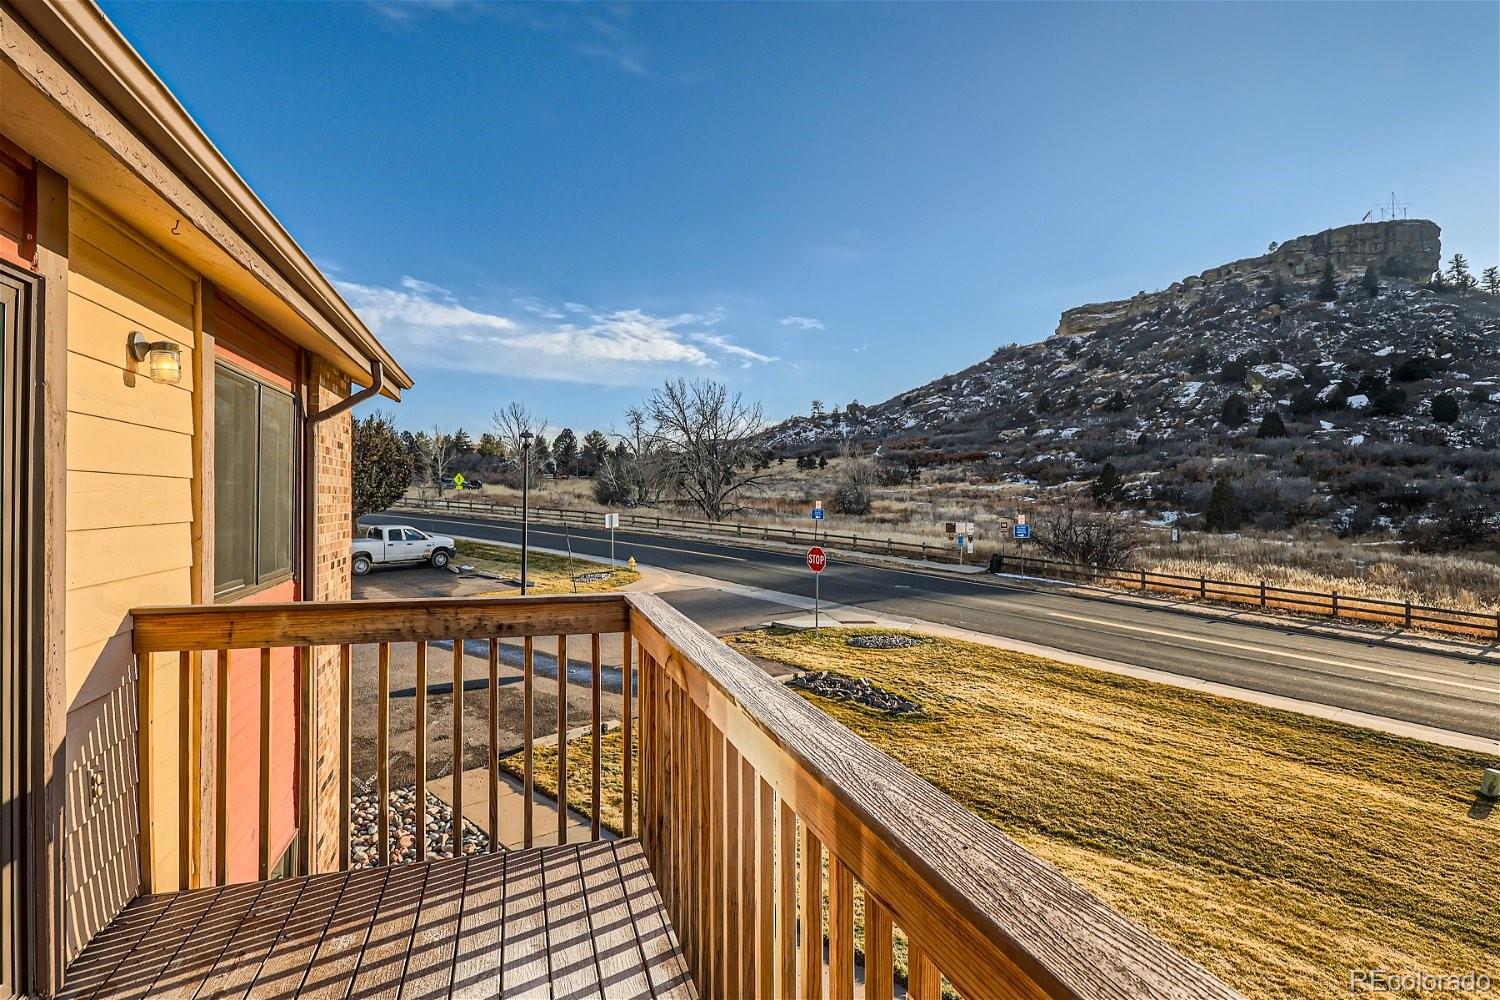 767  canyon drive, Castle Rock sold home. Closed on 2024-04-12 for $355,000.